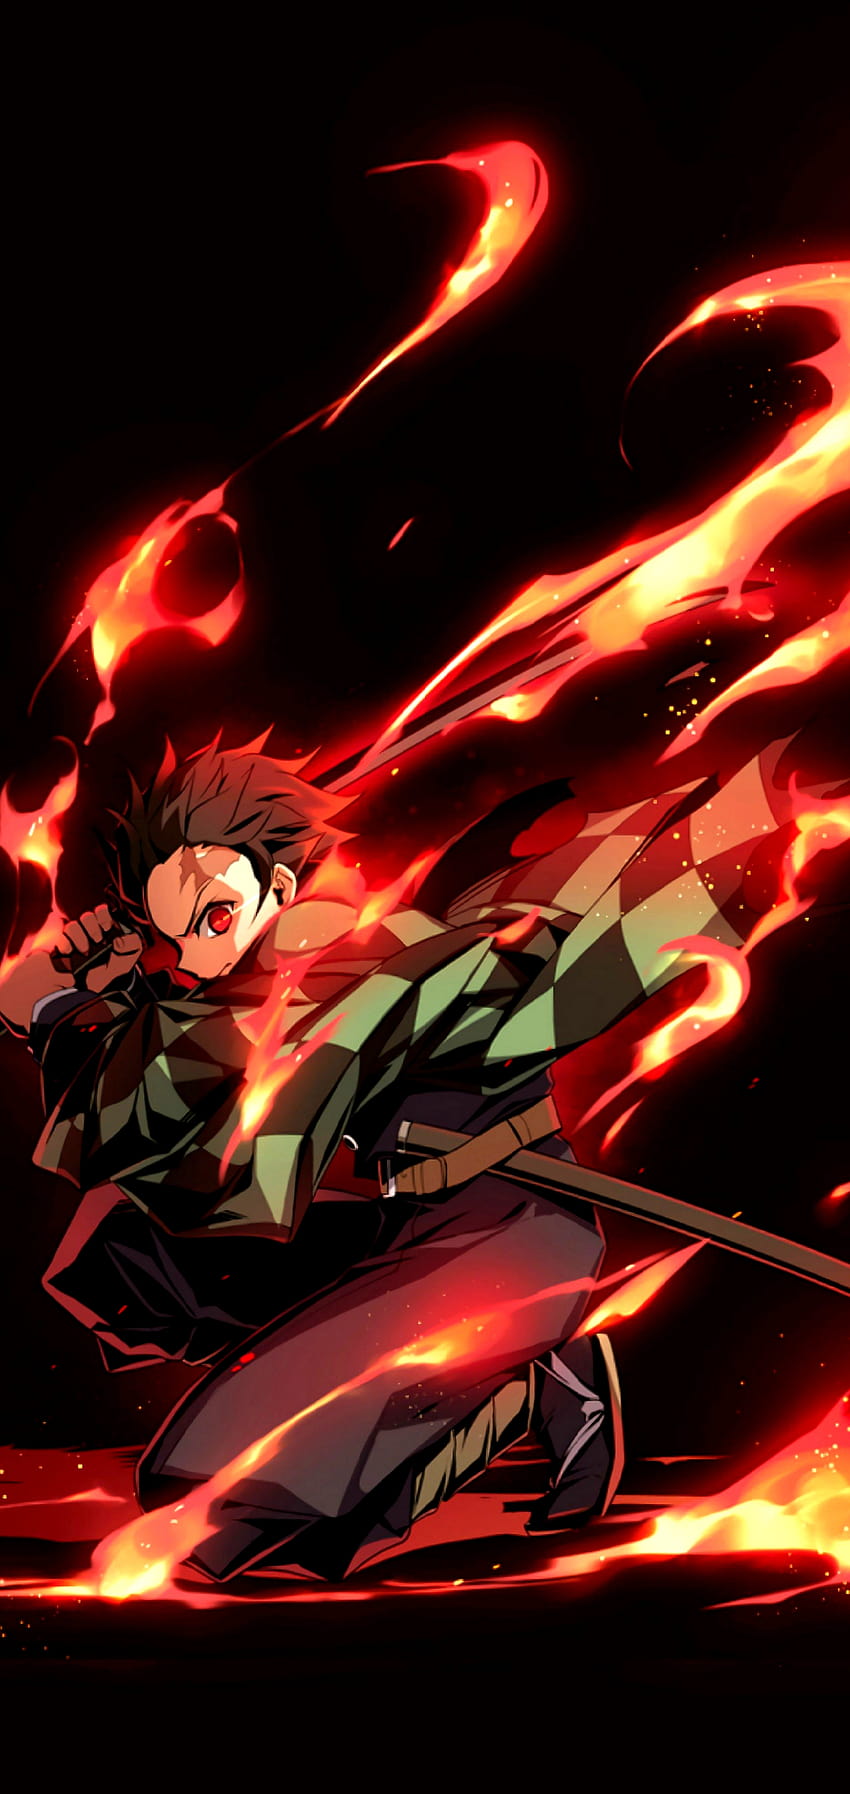 Request for u/bosssantana163. Demon Slayer dark style for AMOLED : Note10, best anime amoled HD phone wallpaper